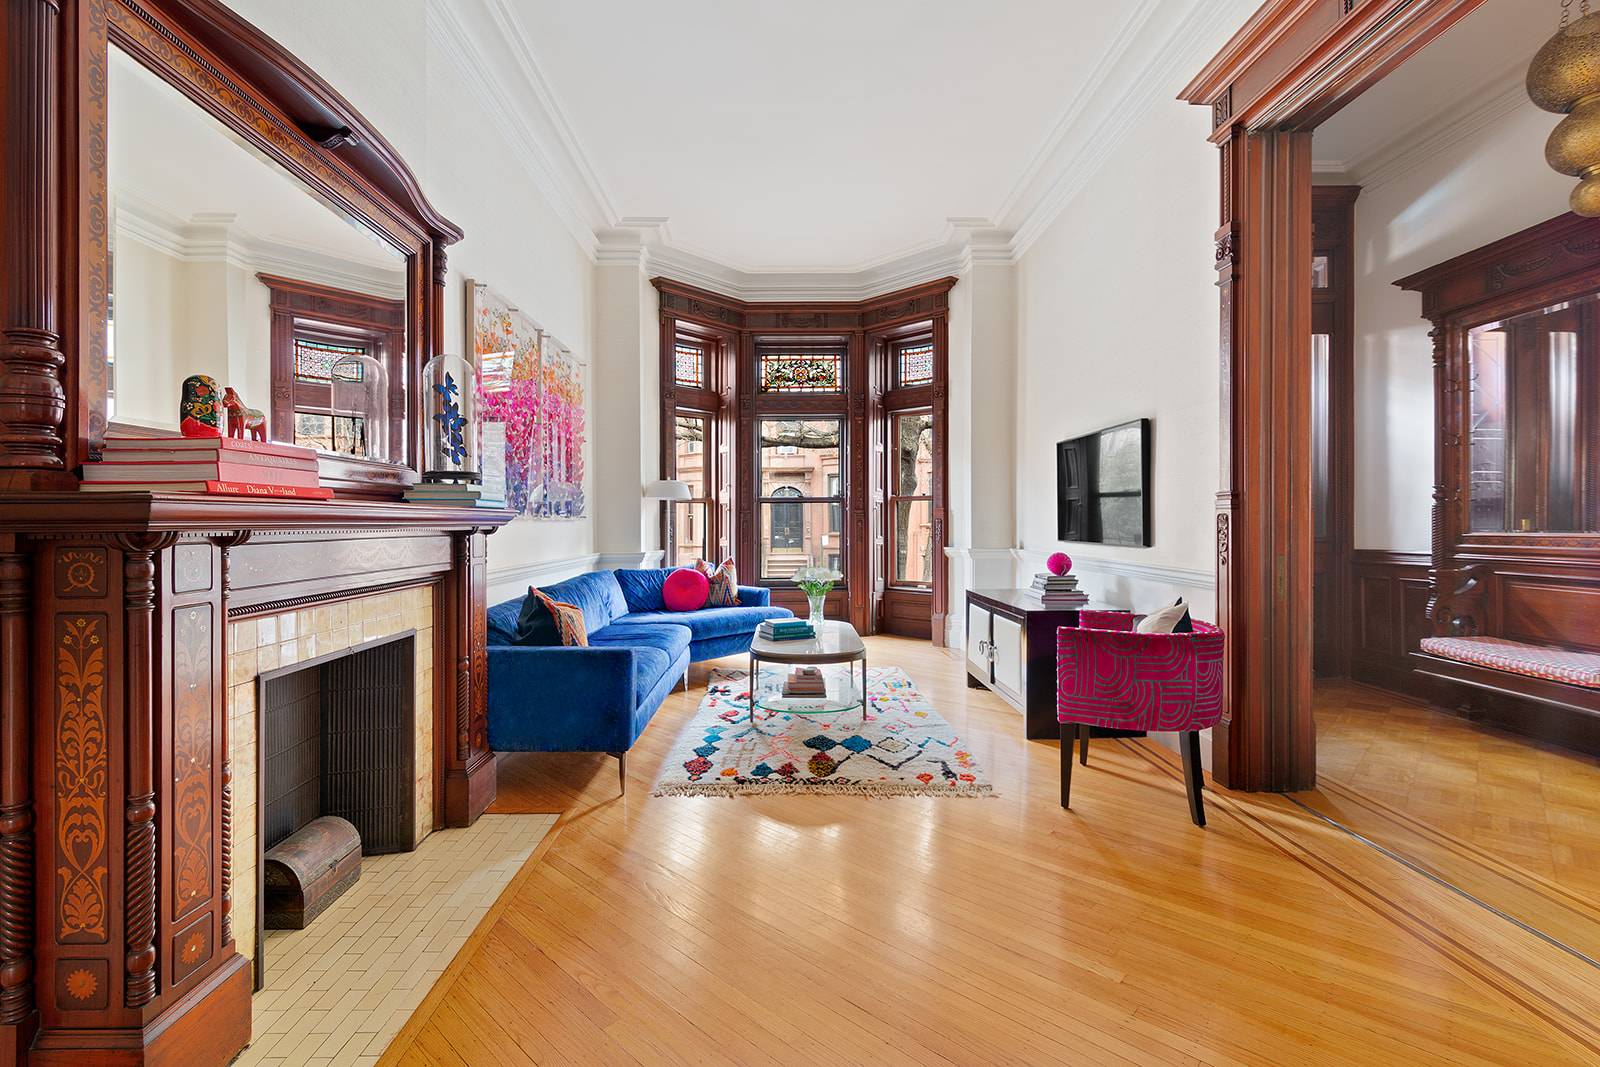 845 President is located in Park Slope s coveted historic district just one block from Prospect Park making this one of the most sought after addresses in Brooklyn.